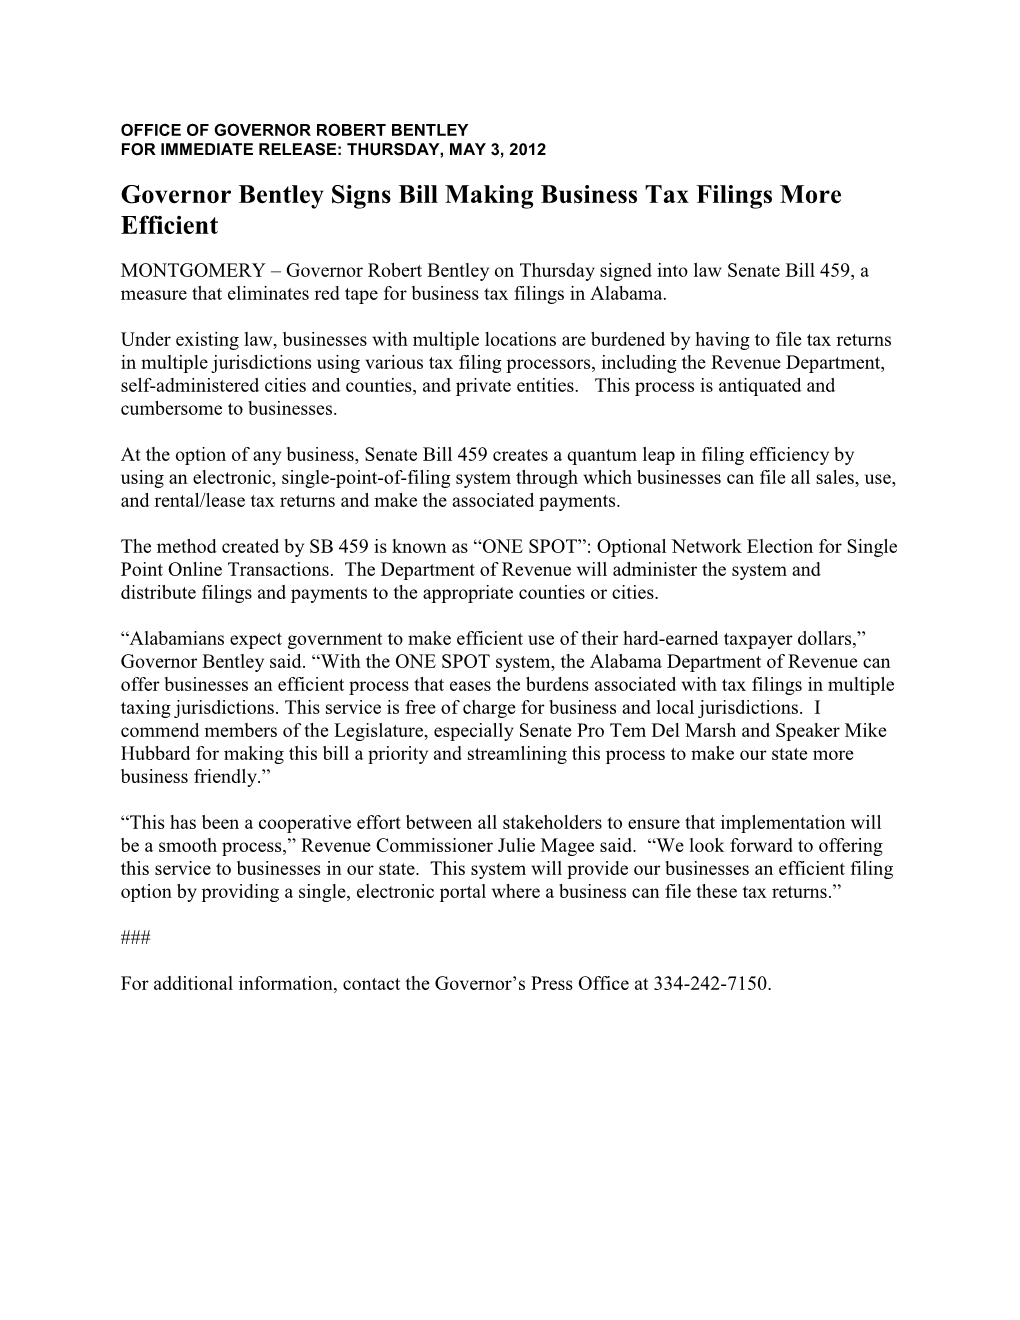 Governor Bentley Signs Bill Making Business Tax Filings More Efficient